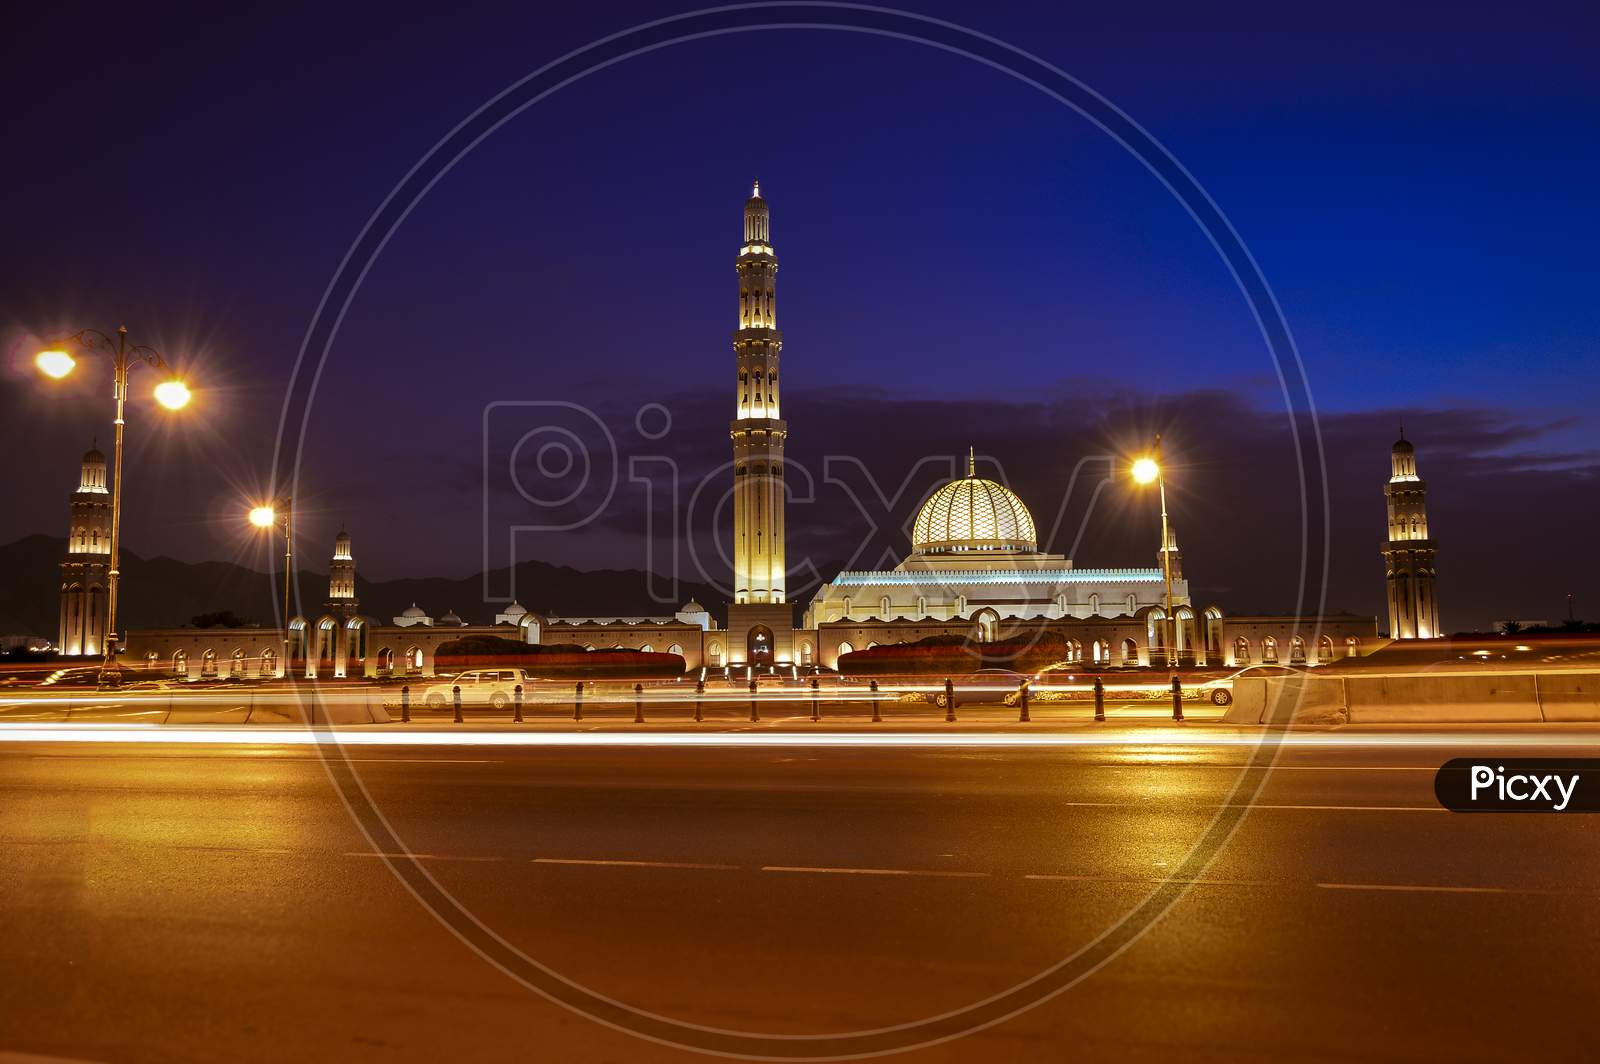 Sultan Quaboos Grand Mosque Of Oman, Muscat With Lights In The Evening.